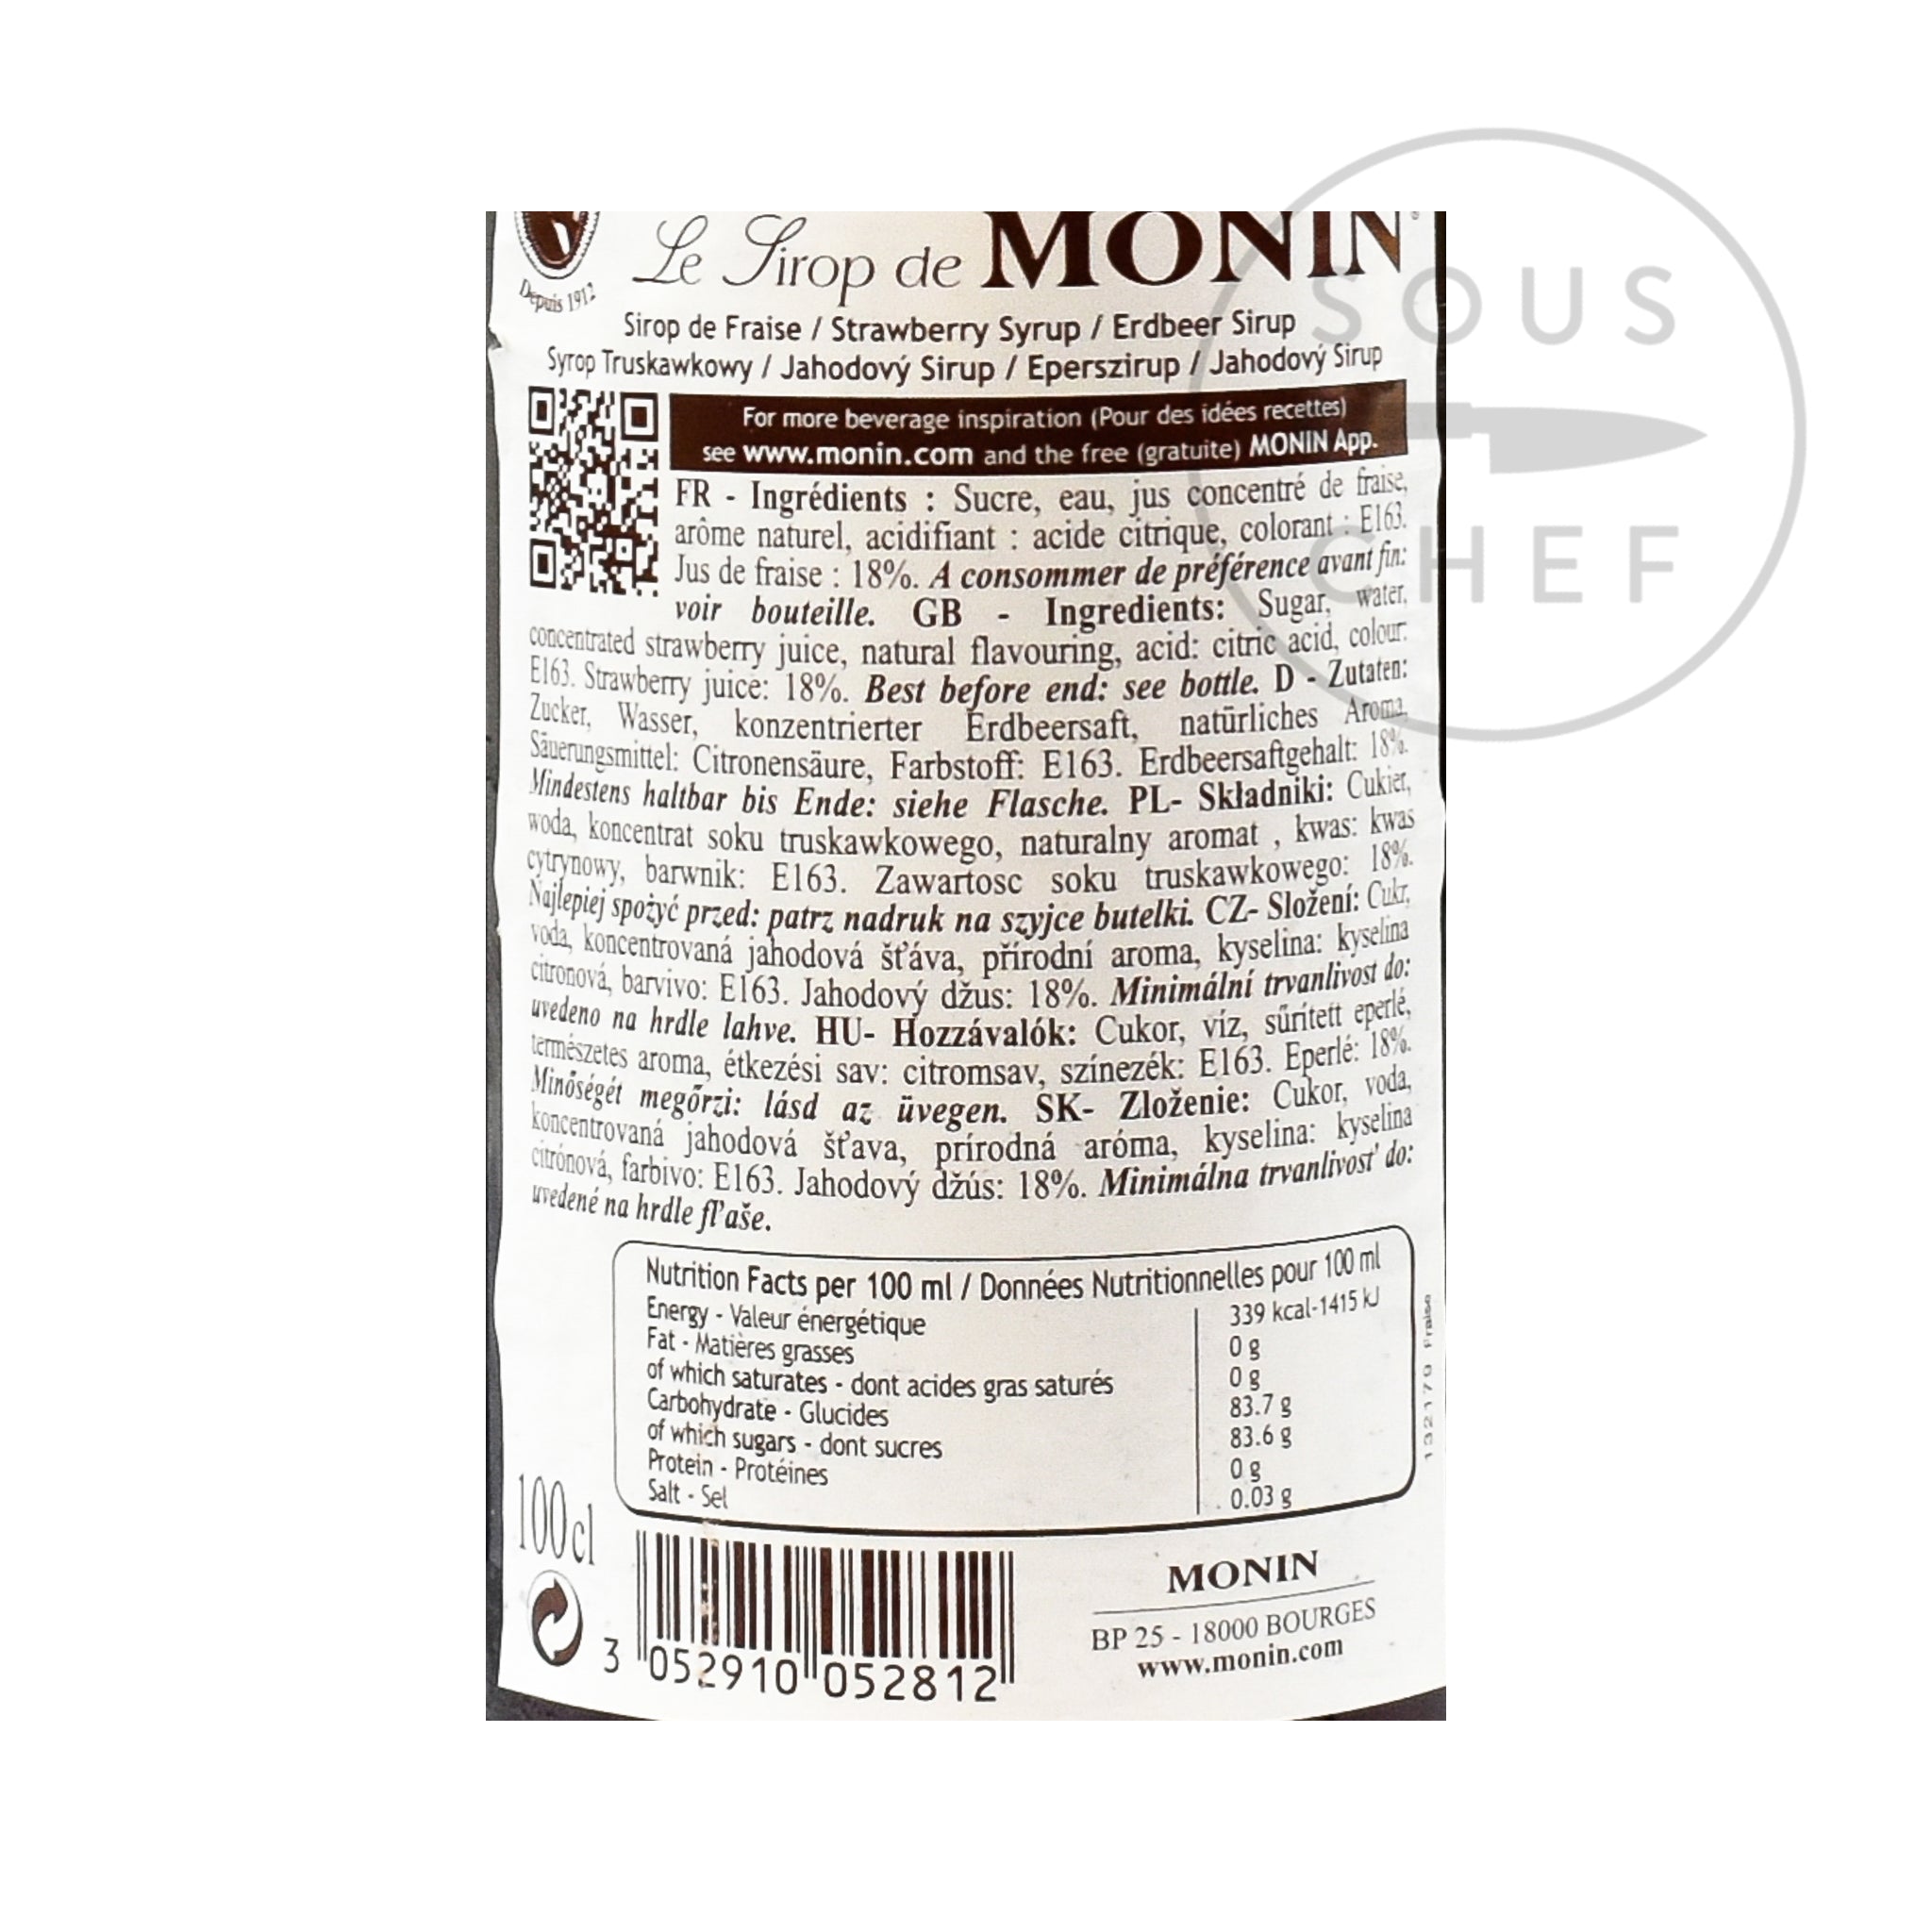 Monin Strawberry Syrup 1 ltr 1 litre nutritional information ingredients